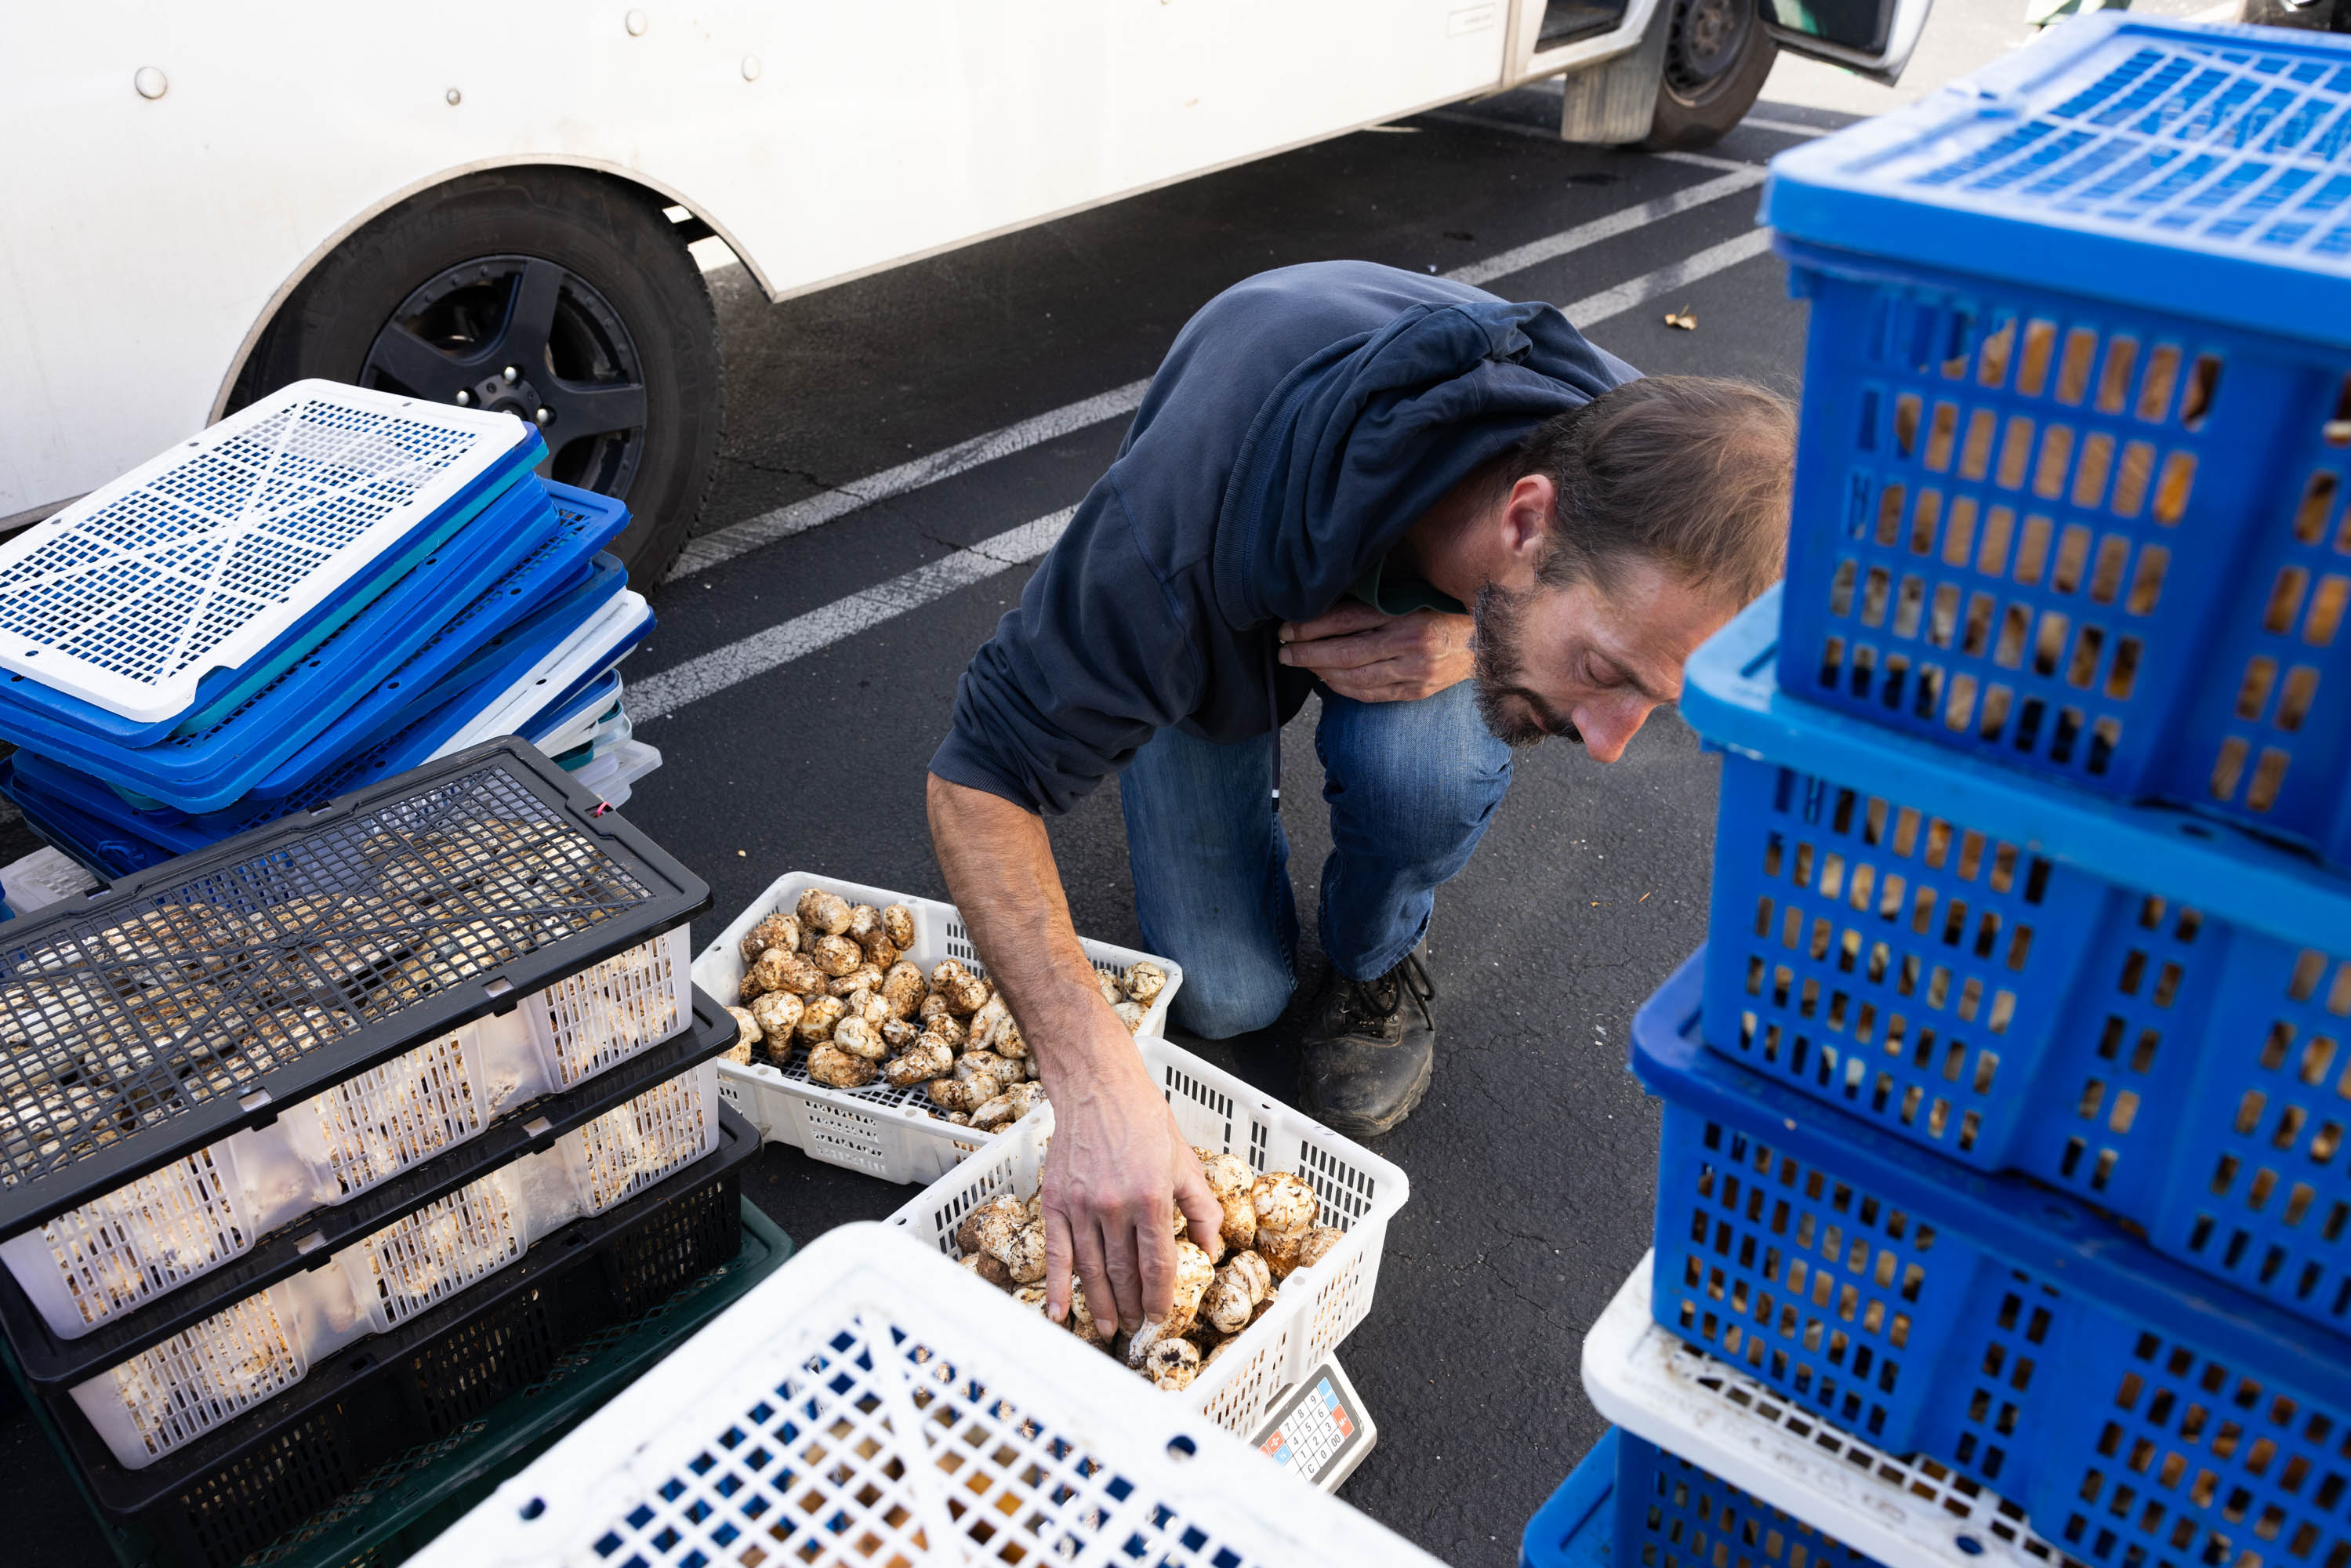 A man sorts through a bin of mushrooms while surrounded by other bins of mushrooms.